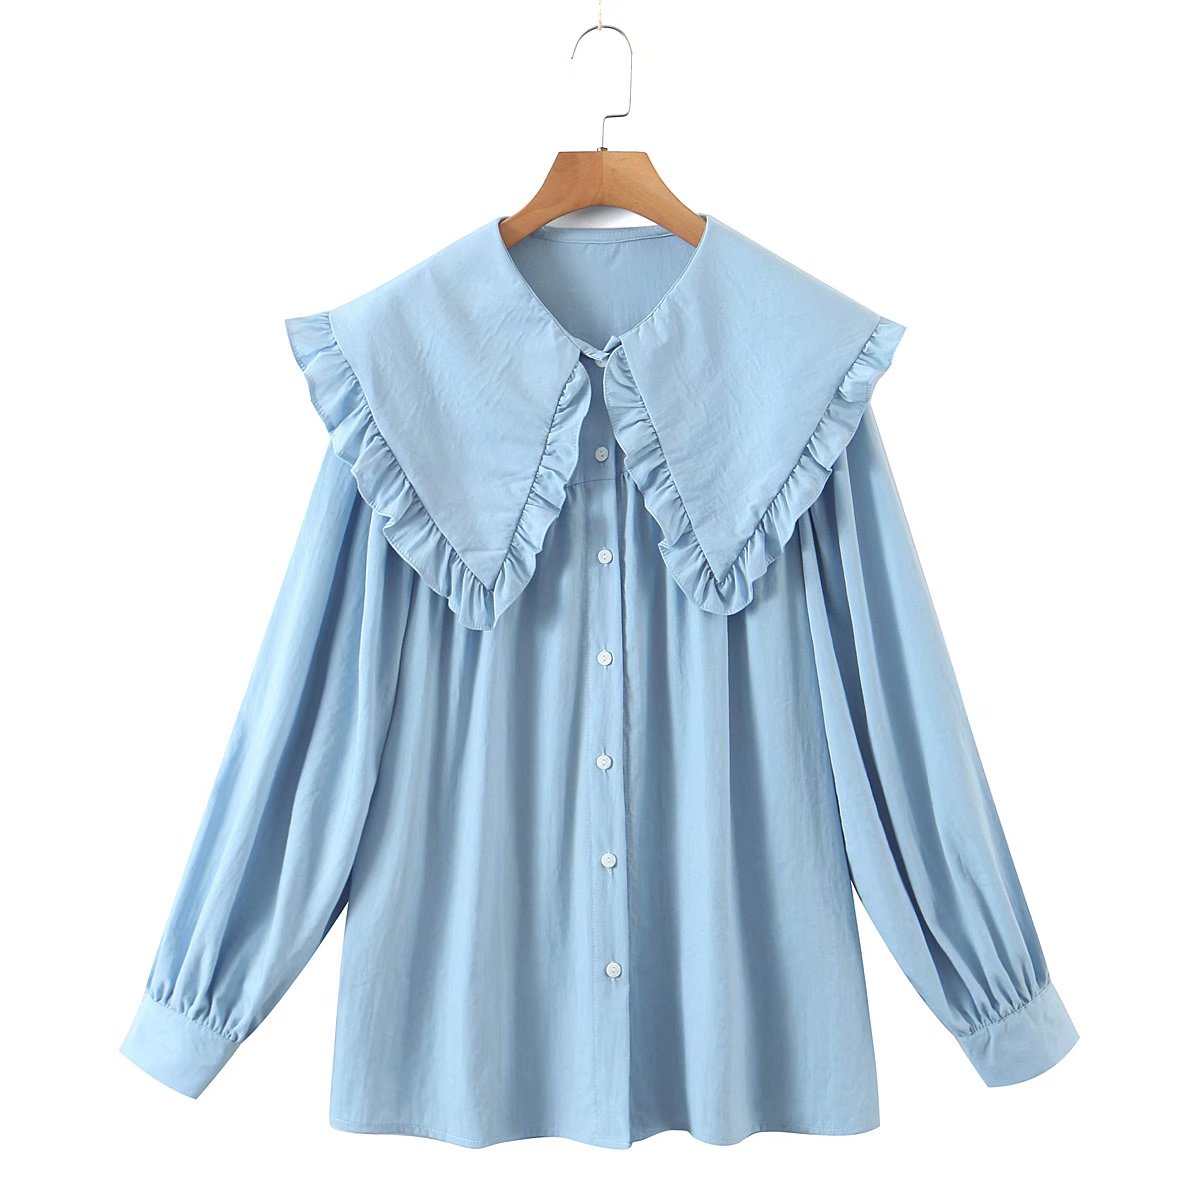 Chicdear Sweet Blue Button-Up Loose Blouses Women's Peter Pan Collar Long Sleeve Female Shirts Chic Tops